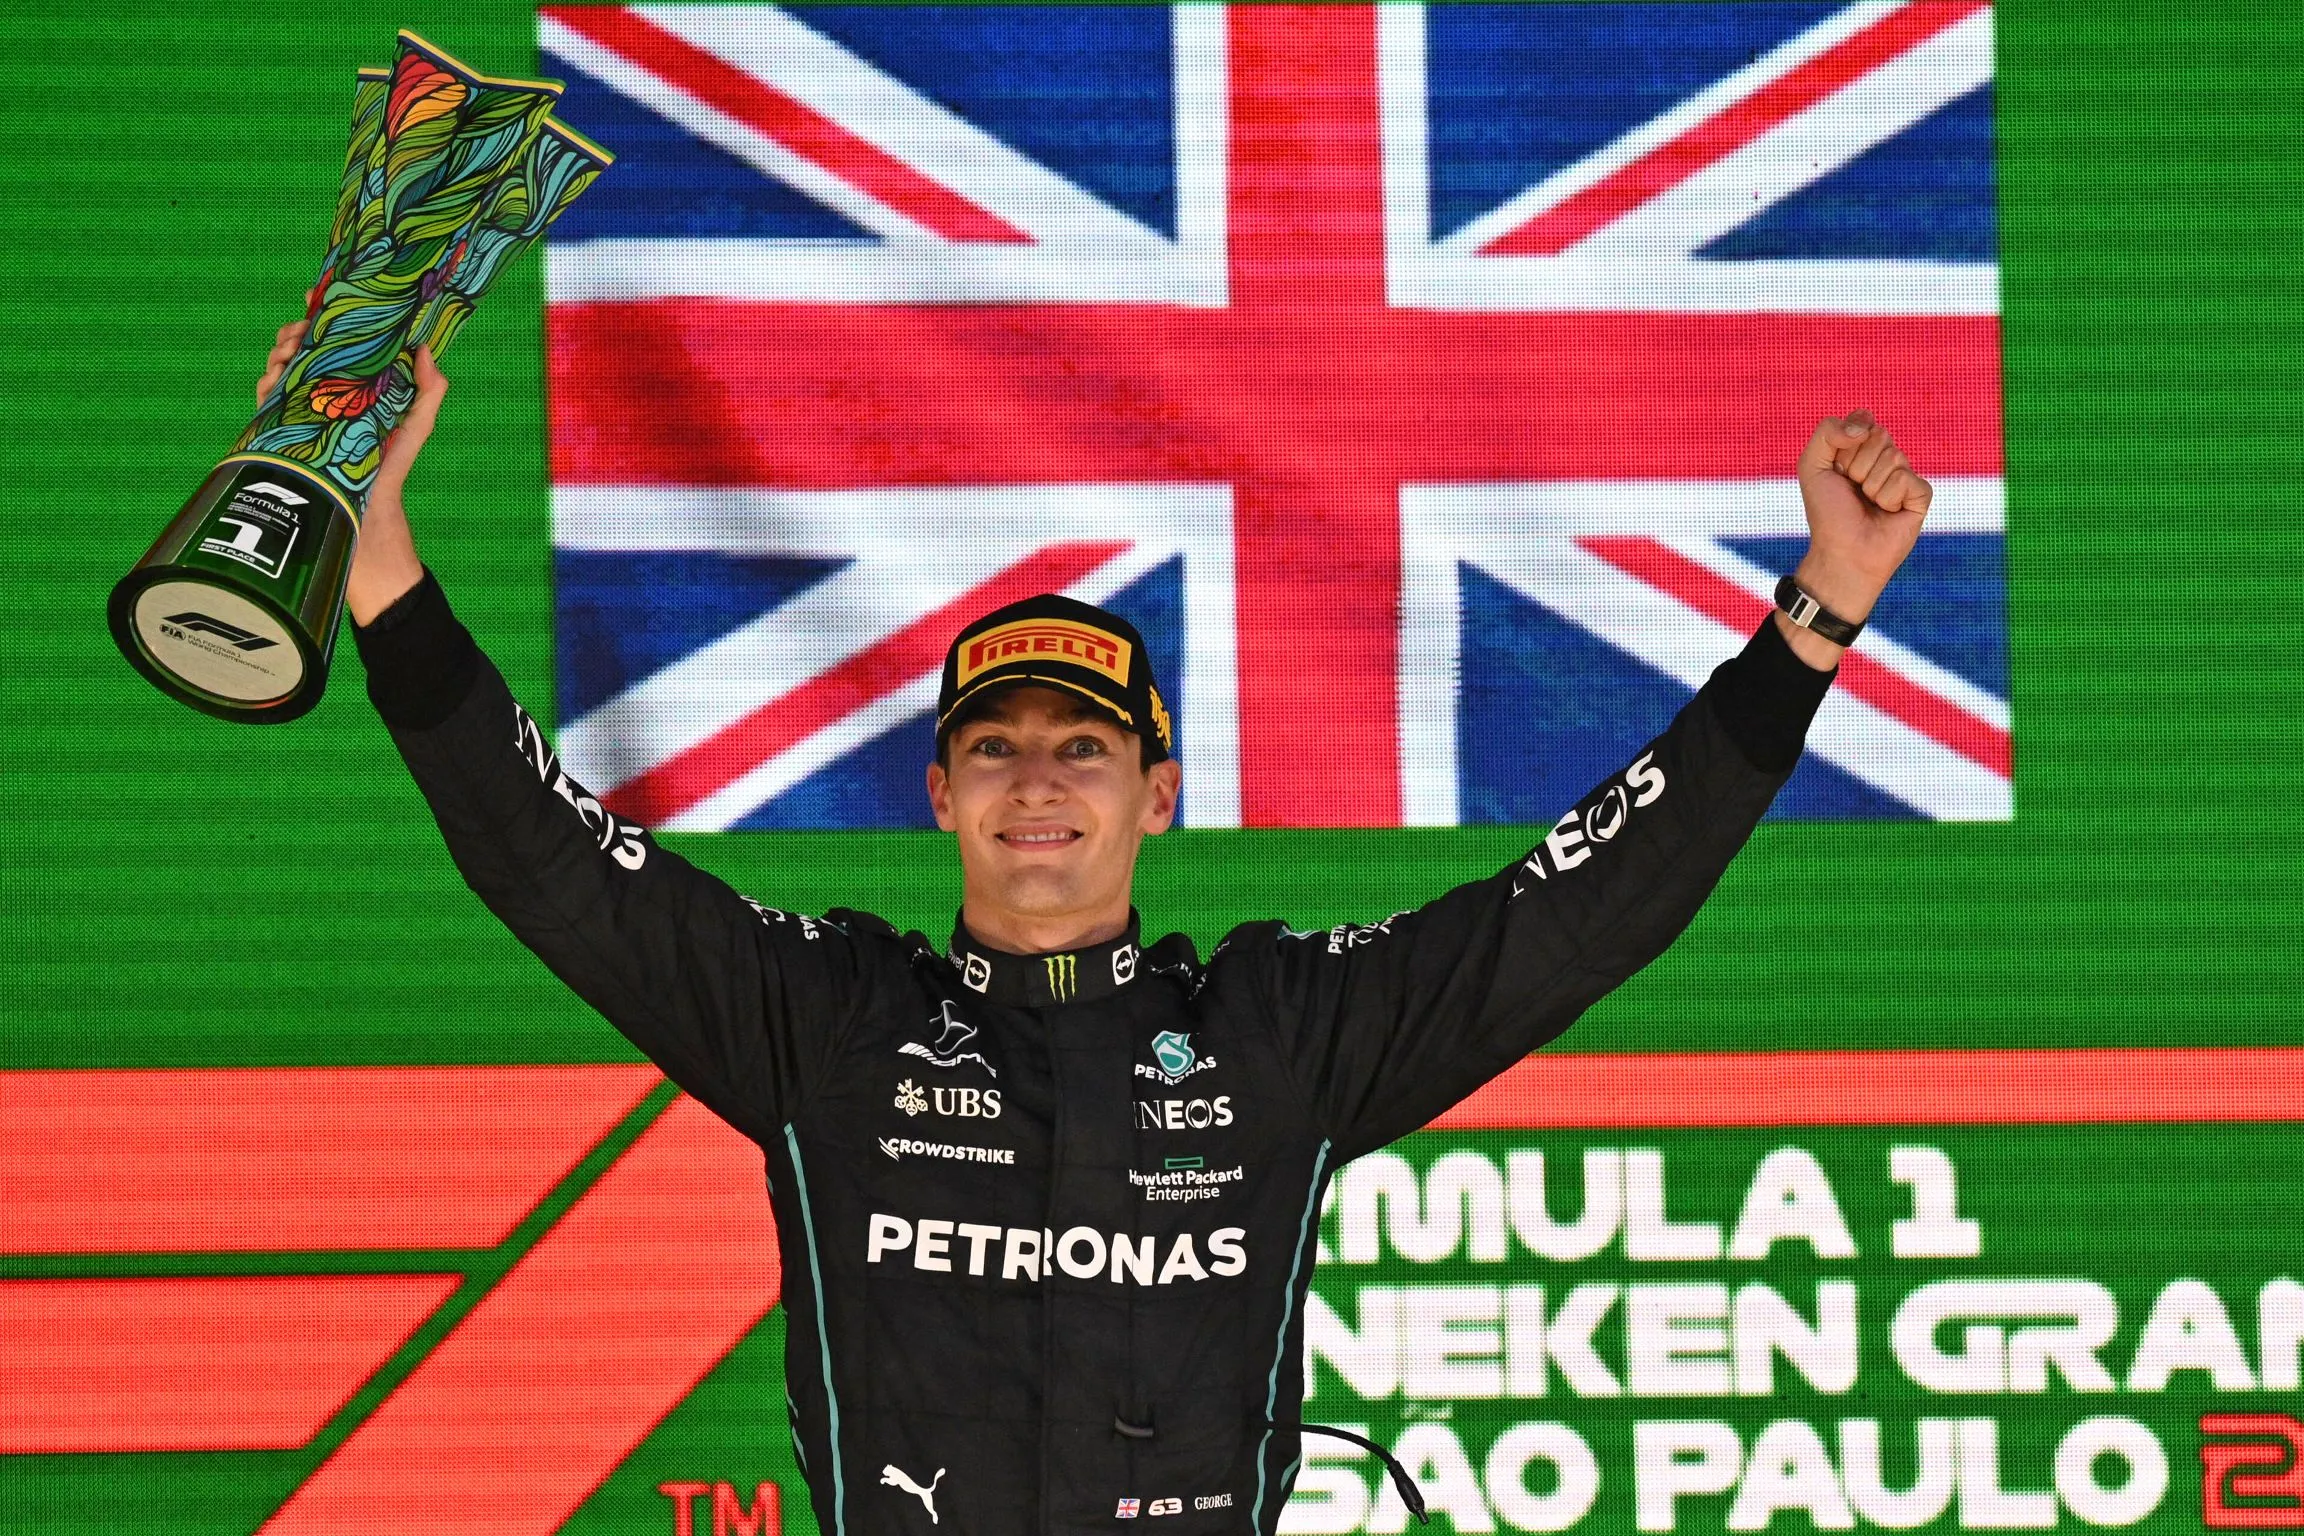 Emotional Russell sheds tears after his first Formula One victory in Brazil